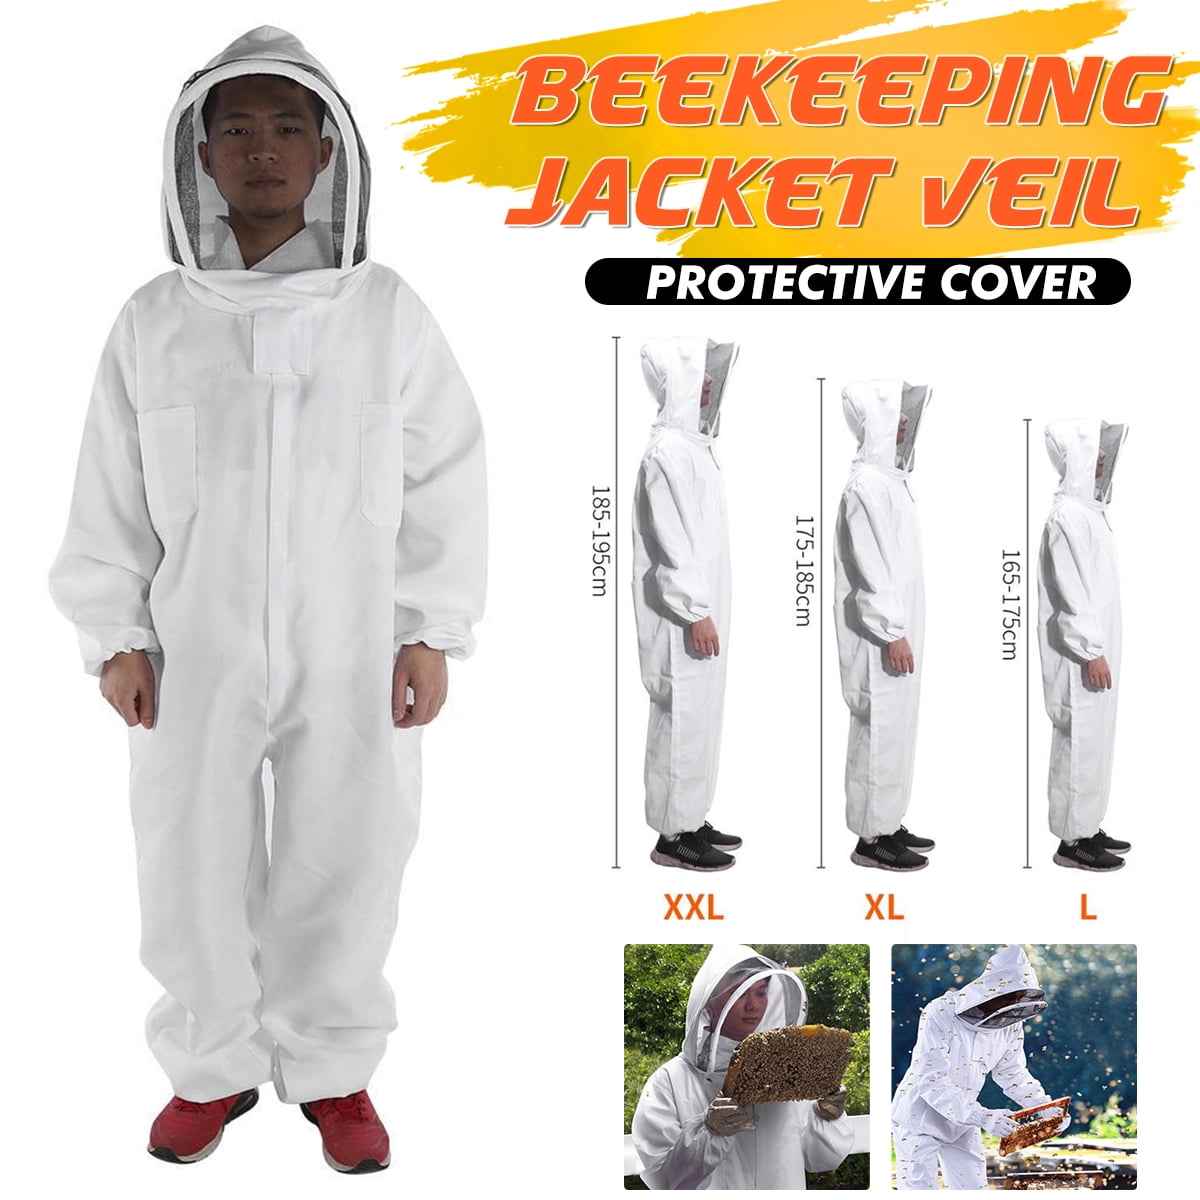 Professional Cotton Full Body Beekeeping Bee Keeping Suit W/ Veil Hood Size XL 